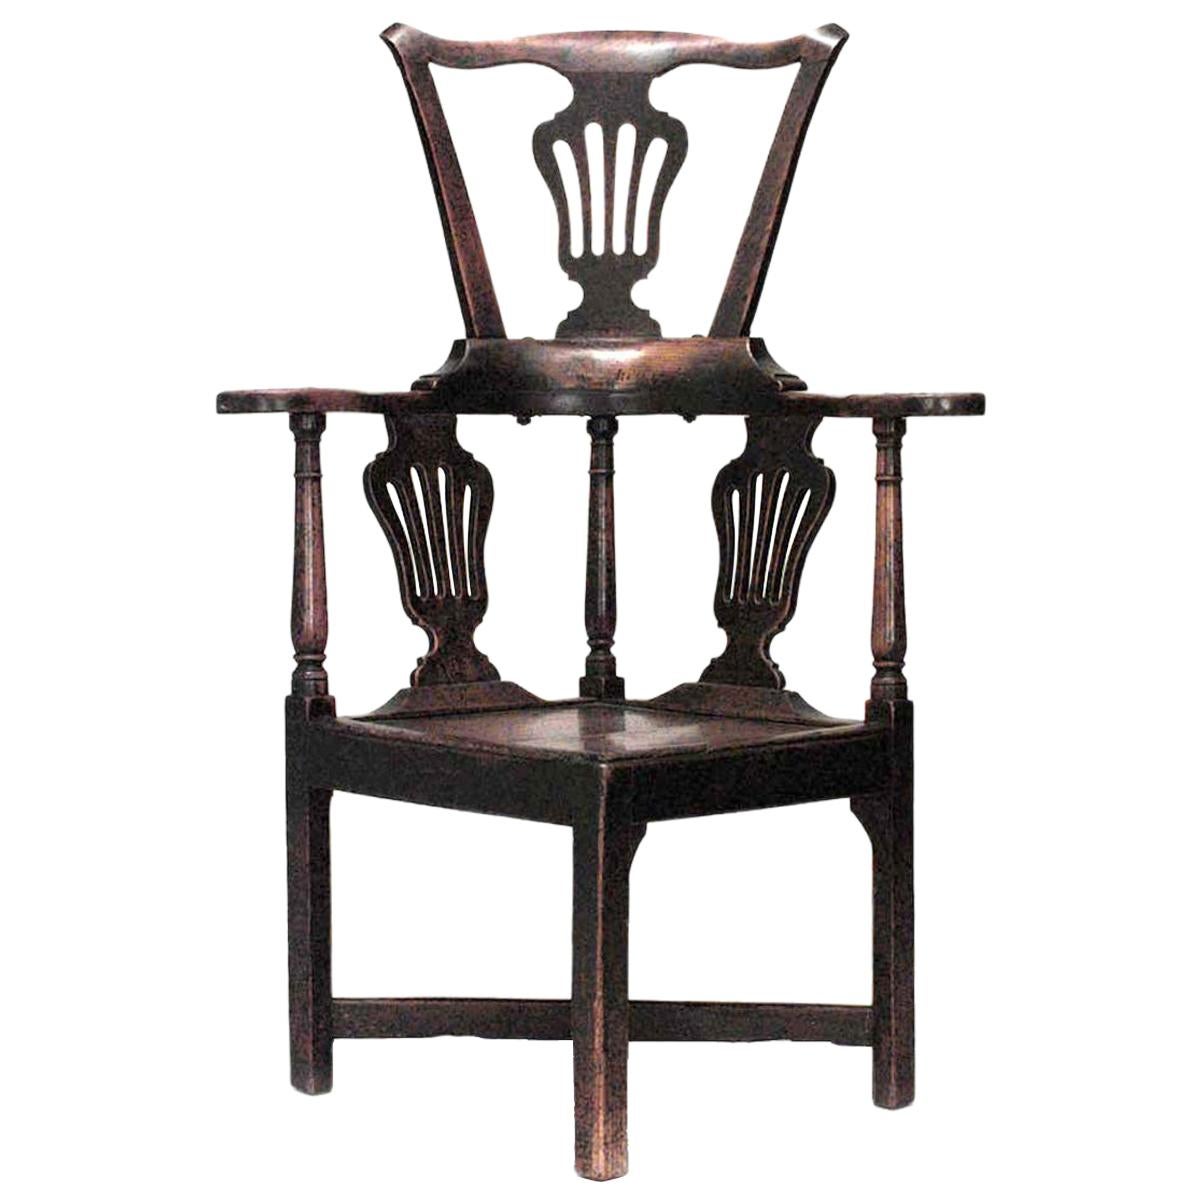 English Country Yew Wood Arm Chair